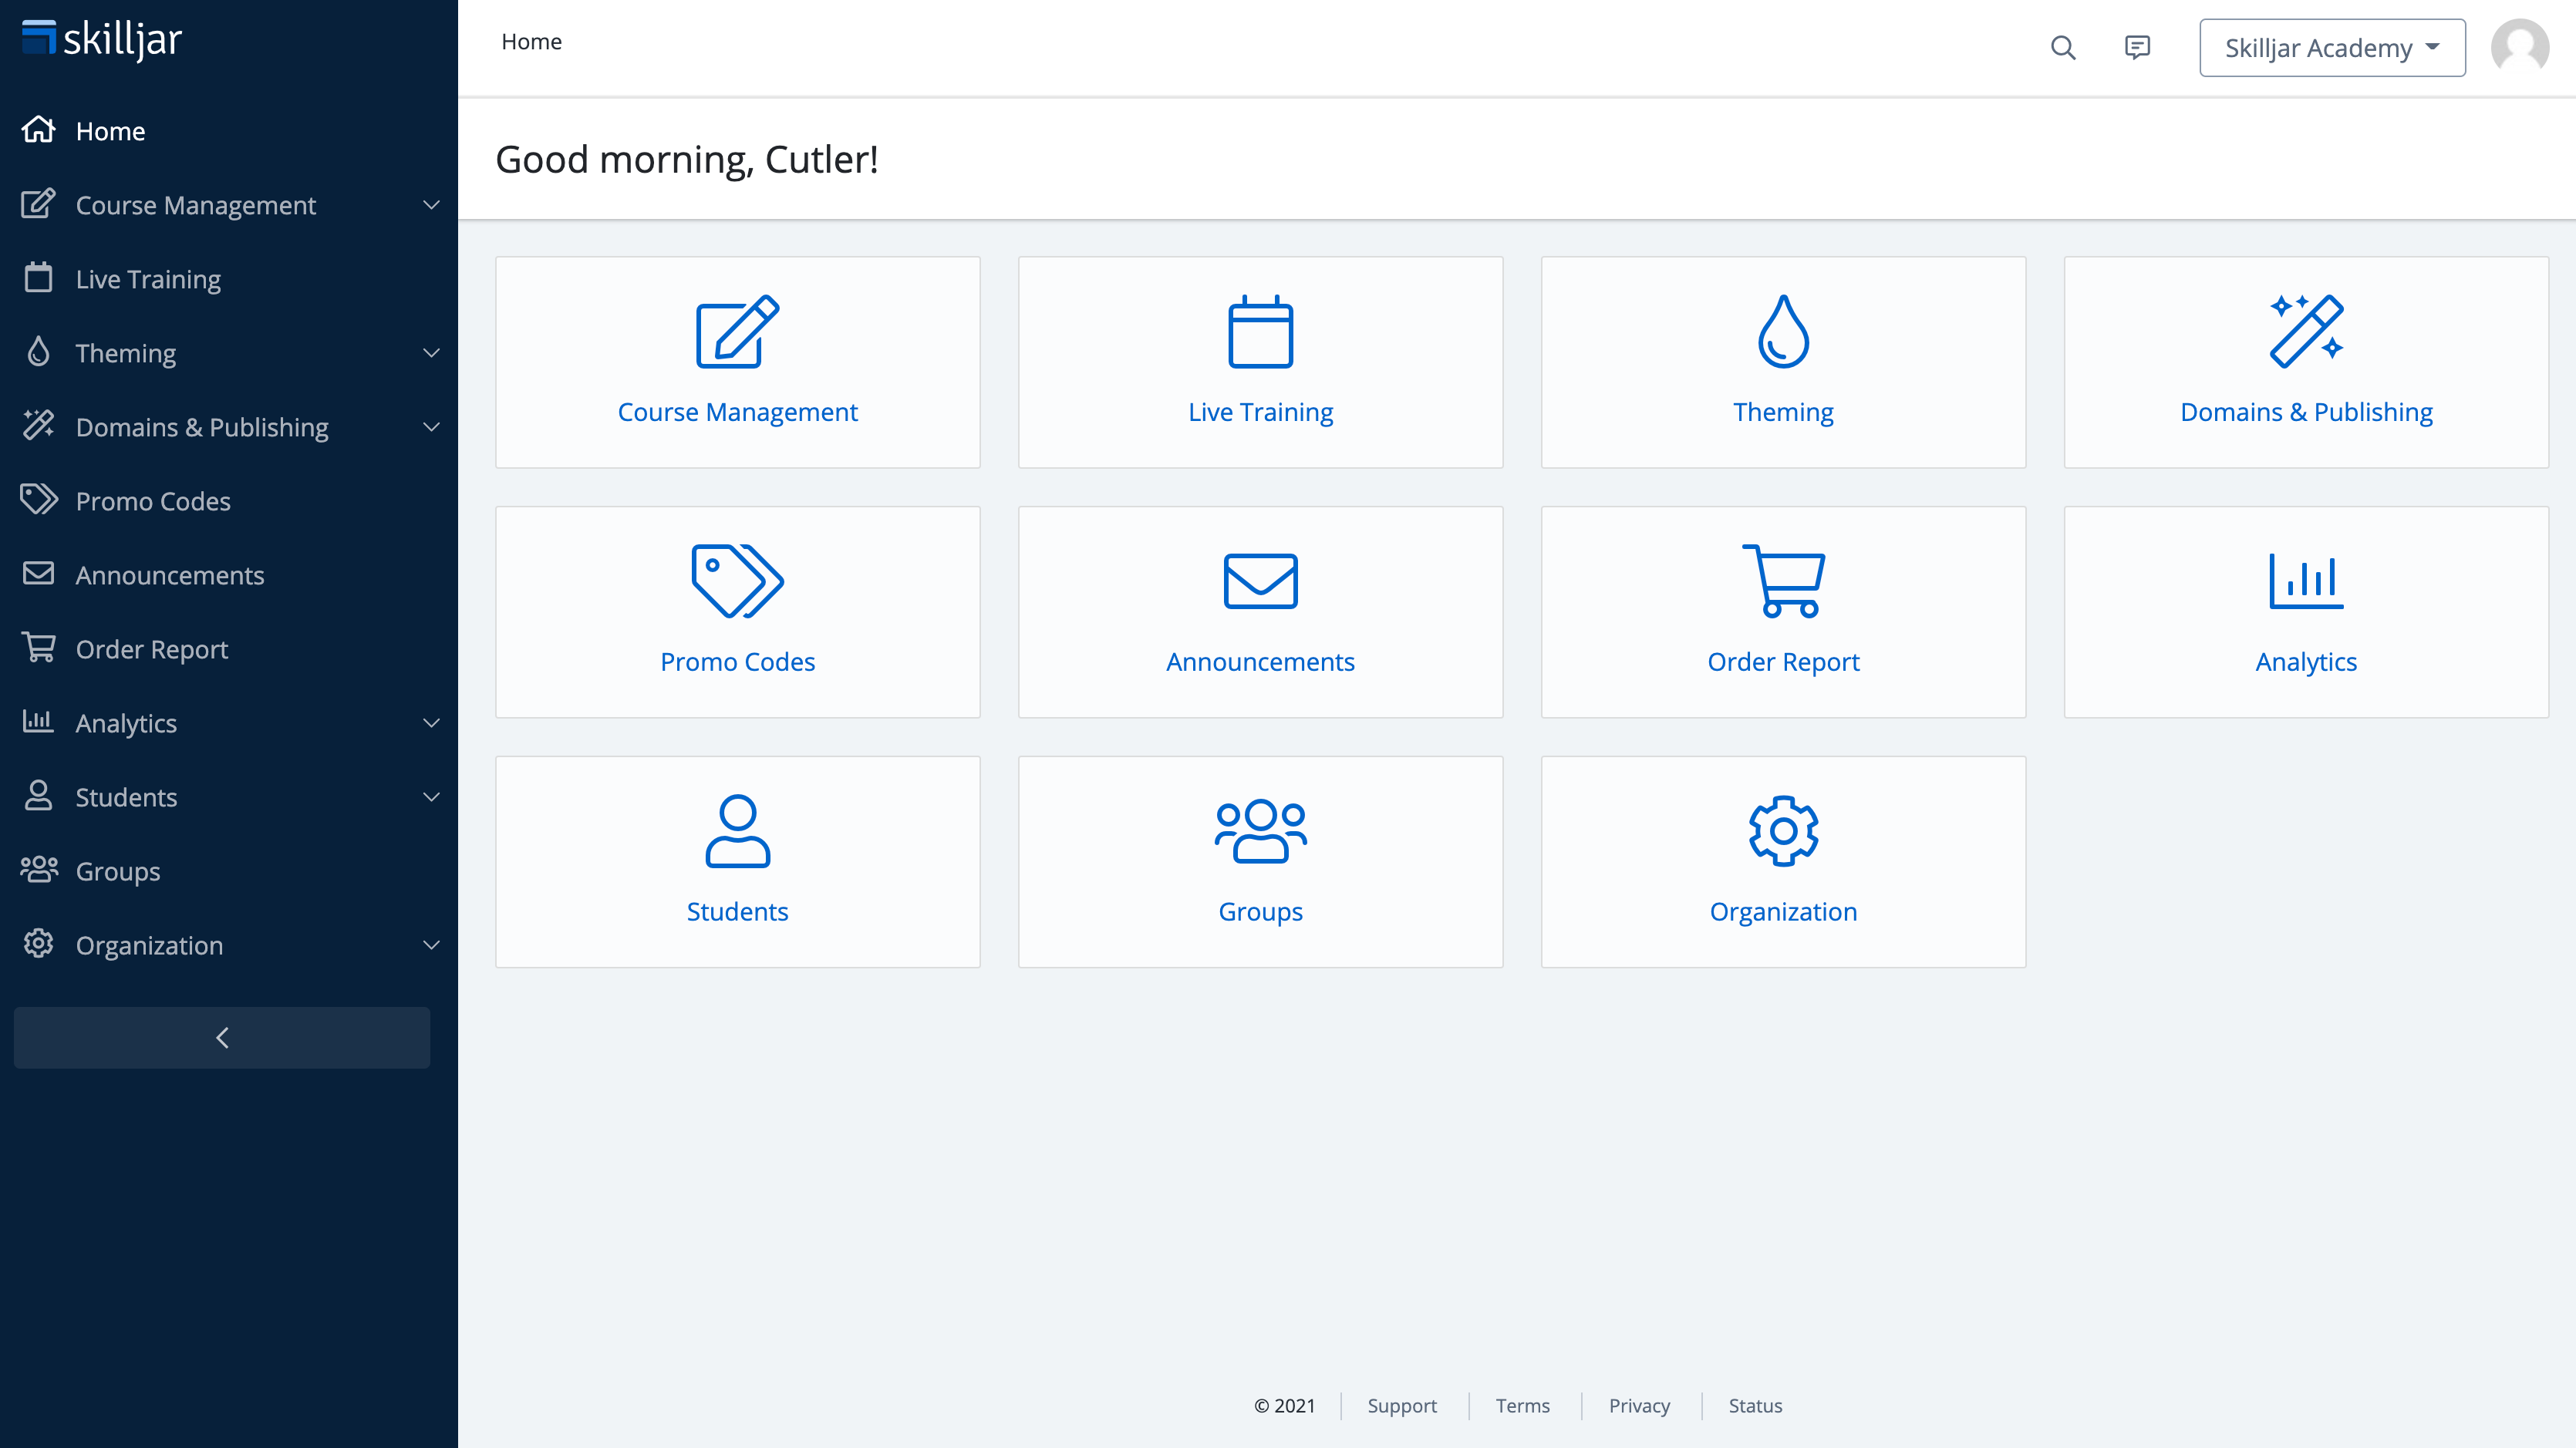 From the Skilljar Dashboard, access all the tools you need with our easy-to-use interface